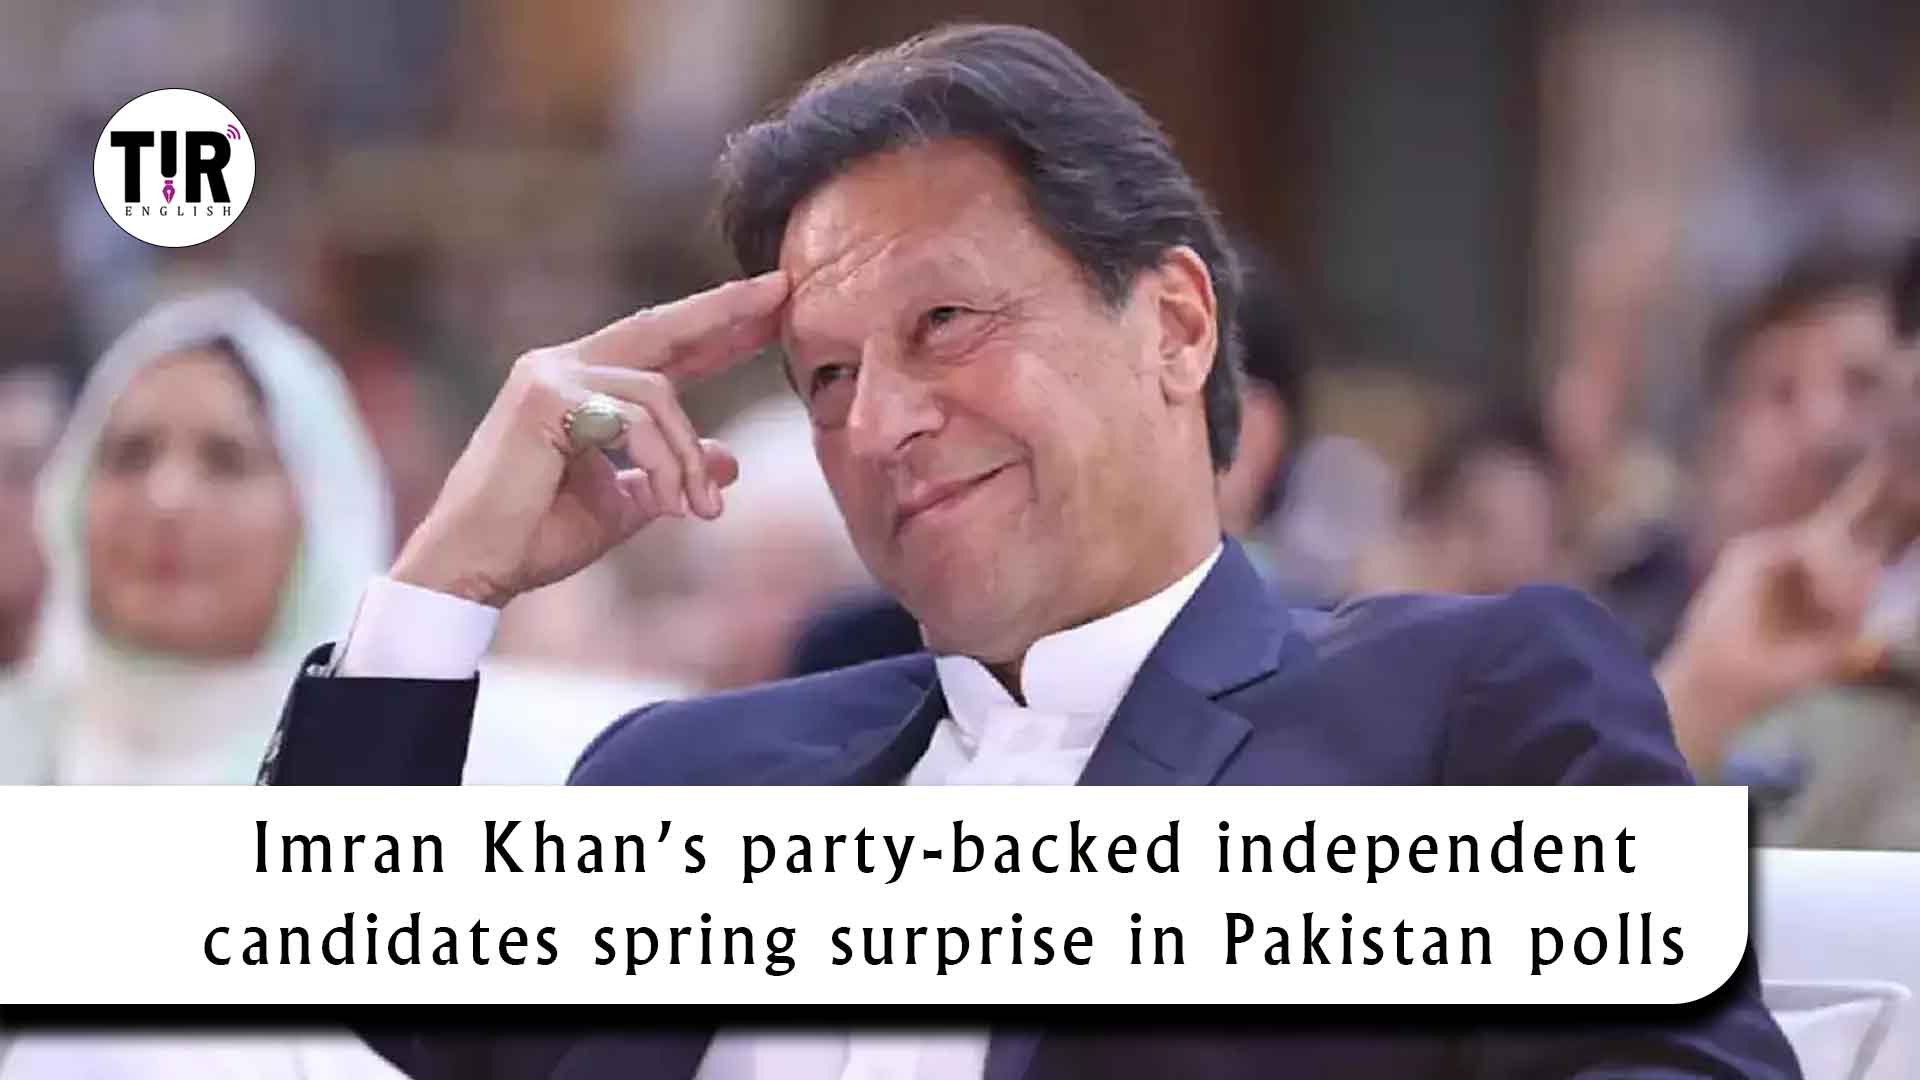 Imran Khan’s party-backed independent candidates spring surprise in Pakistan polls